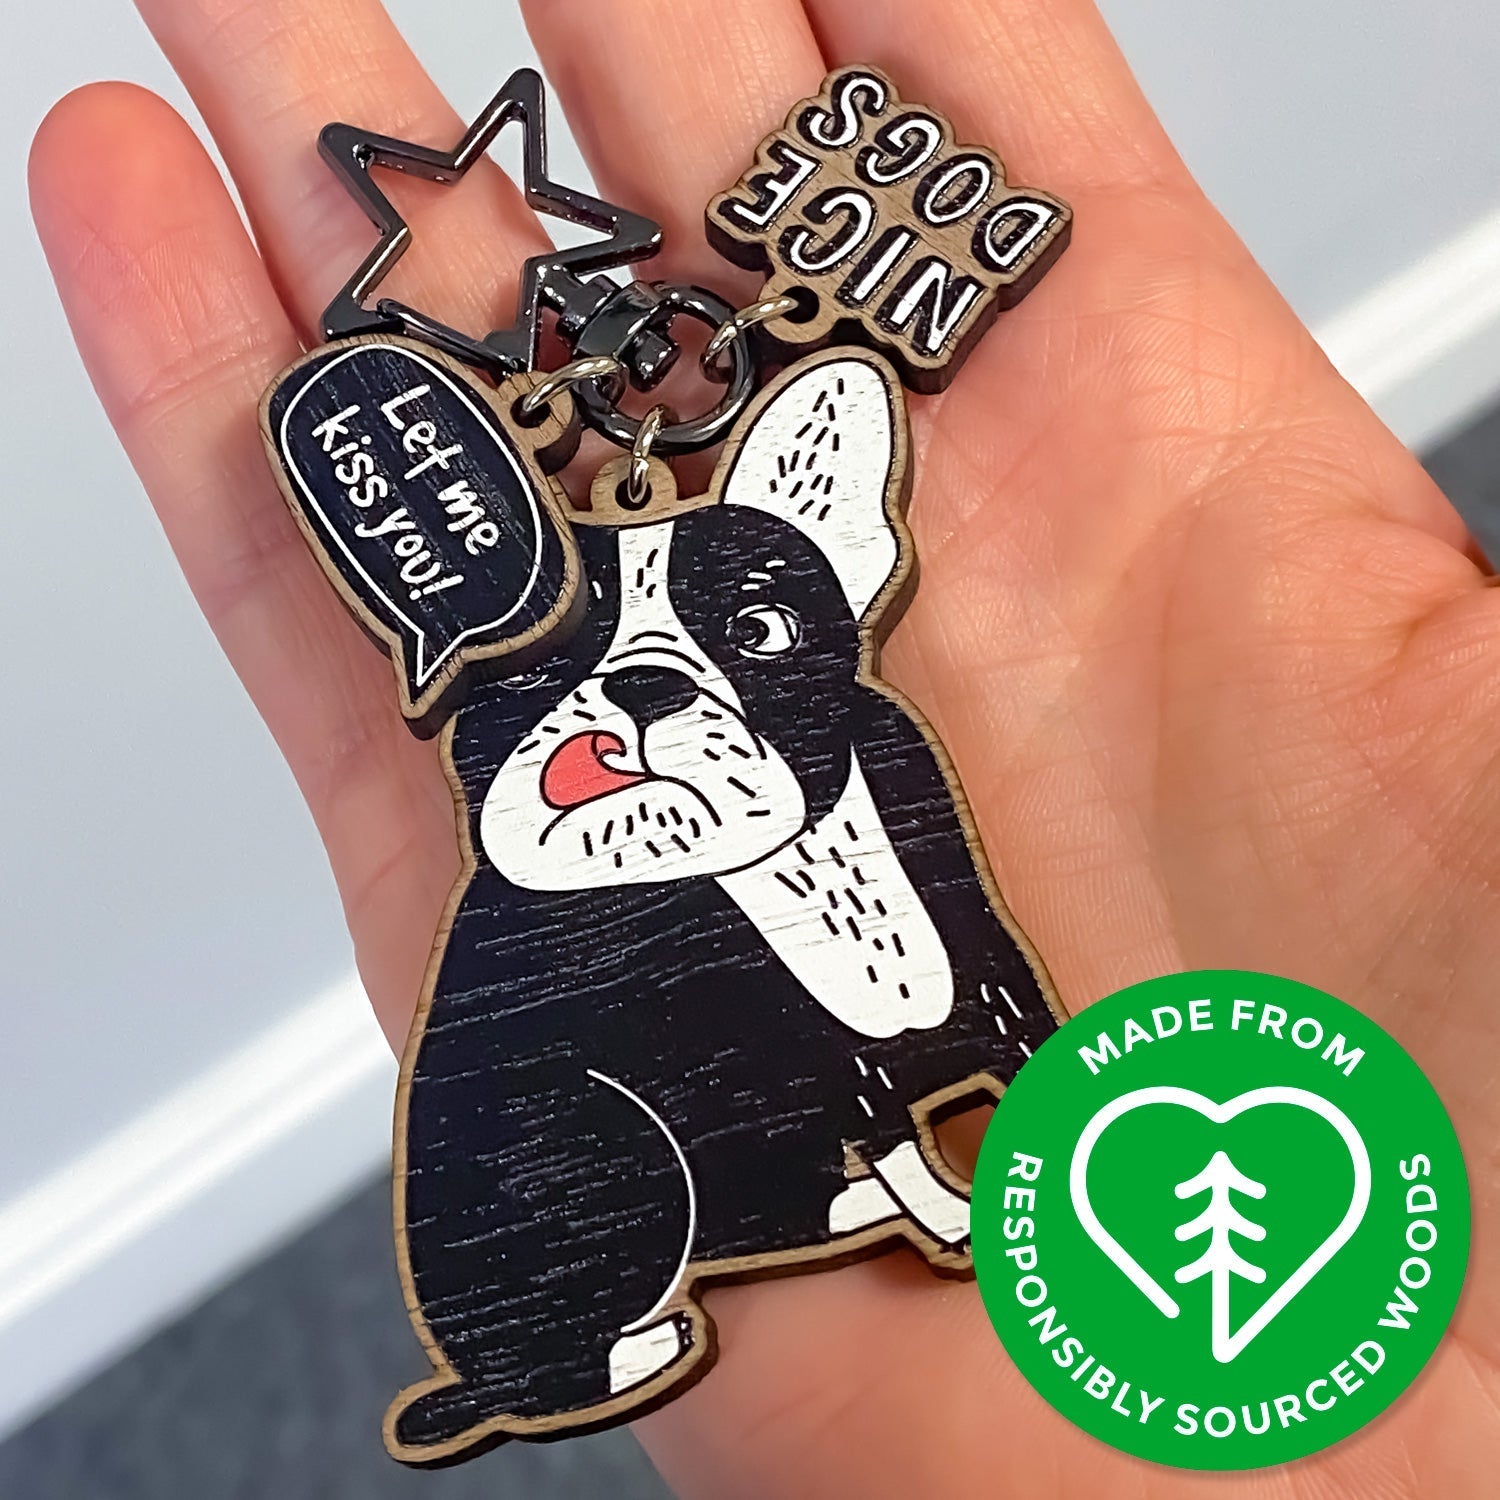 Wholesale Dog Keychains Products at Factory Prices from Manufacturers in  China, India, Korea, etc.